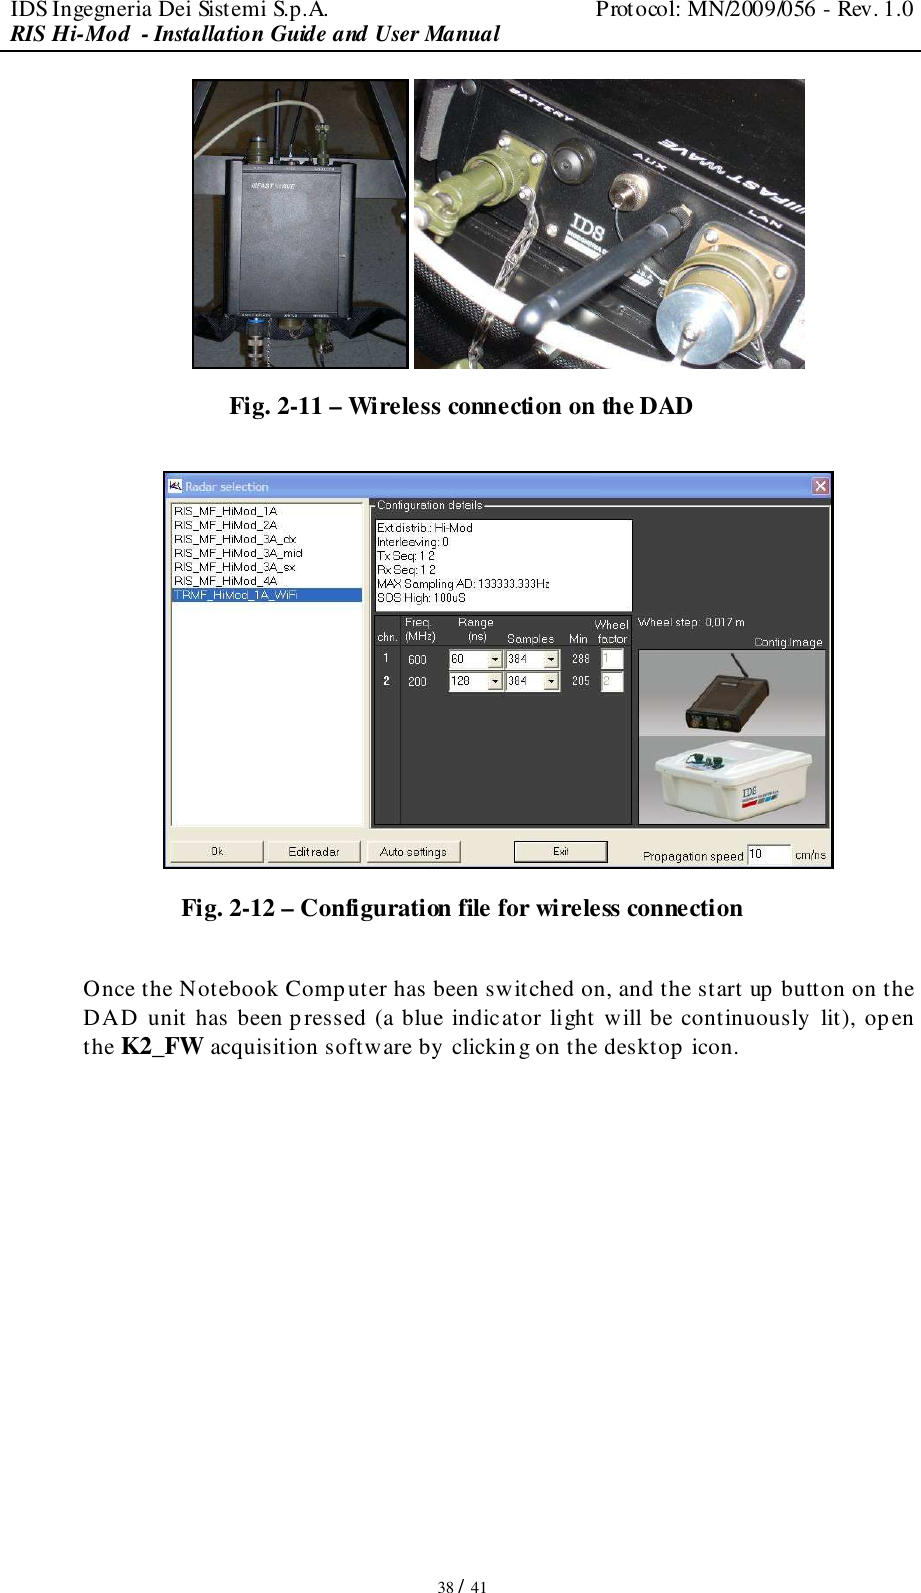 IDS Ingegneria Dei Sistemi S.p.A.  Protocol: MN/2009/056 - Rev. 1.0 RIS Hi-Mod  - Installation Guide and User Manual   38 / 41    Fig. 2-11 – Wireless connection on the DAD   Fig. 2-12 – Configuration file for wireless connection  Once the Notebook Computer has been switched on, and the start up button on the DAD unit has been pressed (a blue indicator light will be continuously lit), open the K2_FW acquisition software by  clicking on the desktop  icon.           